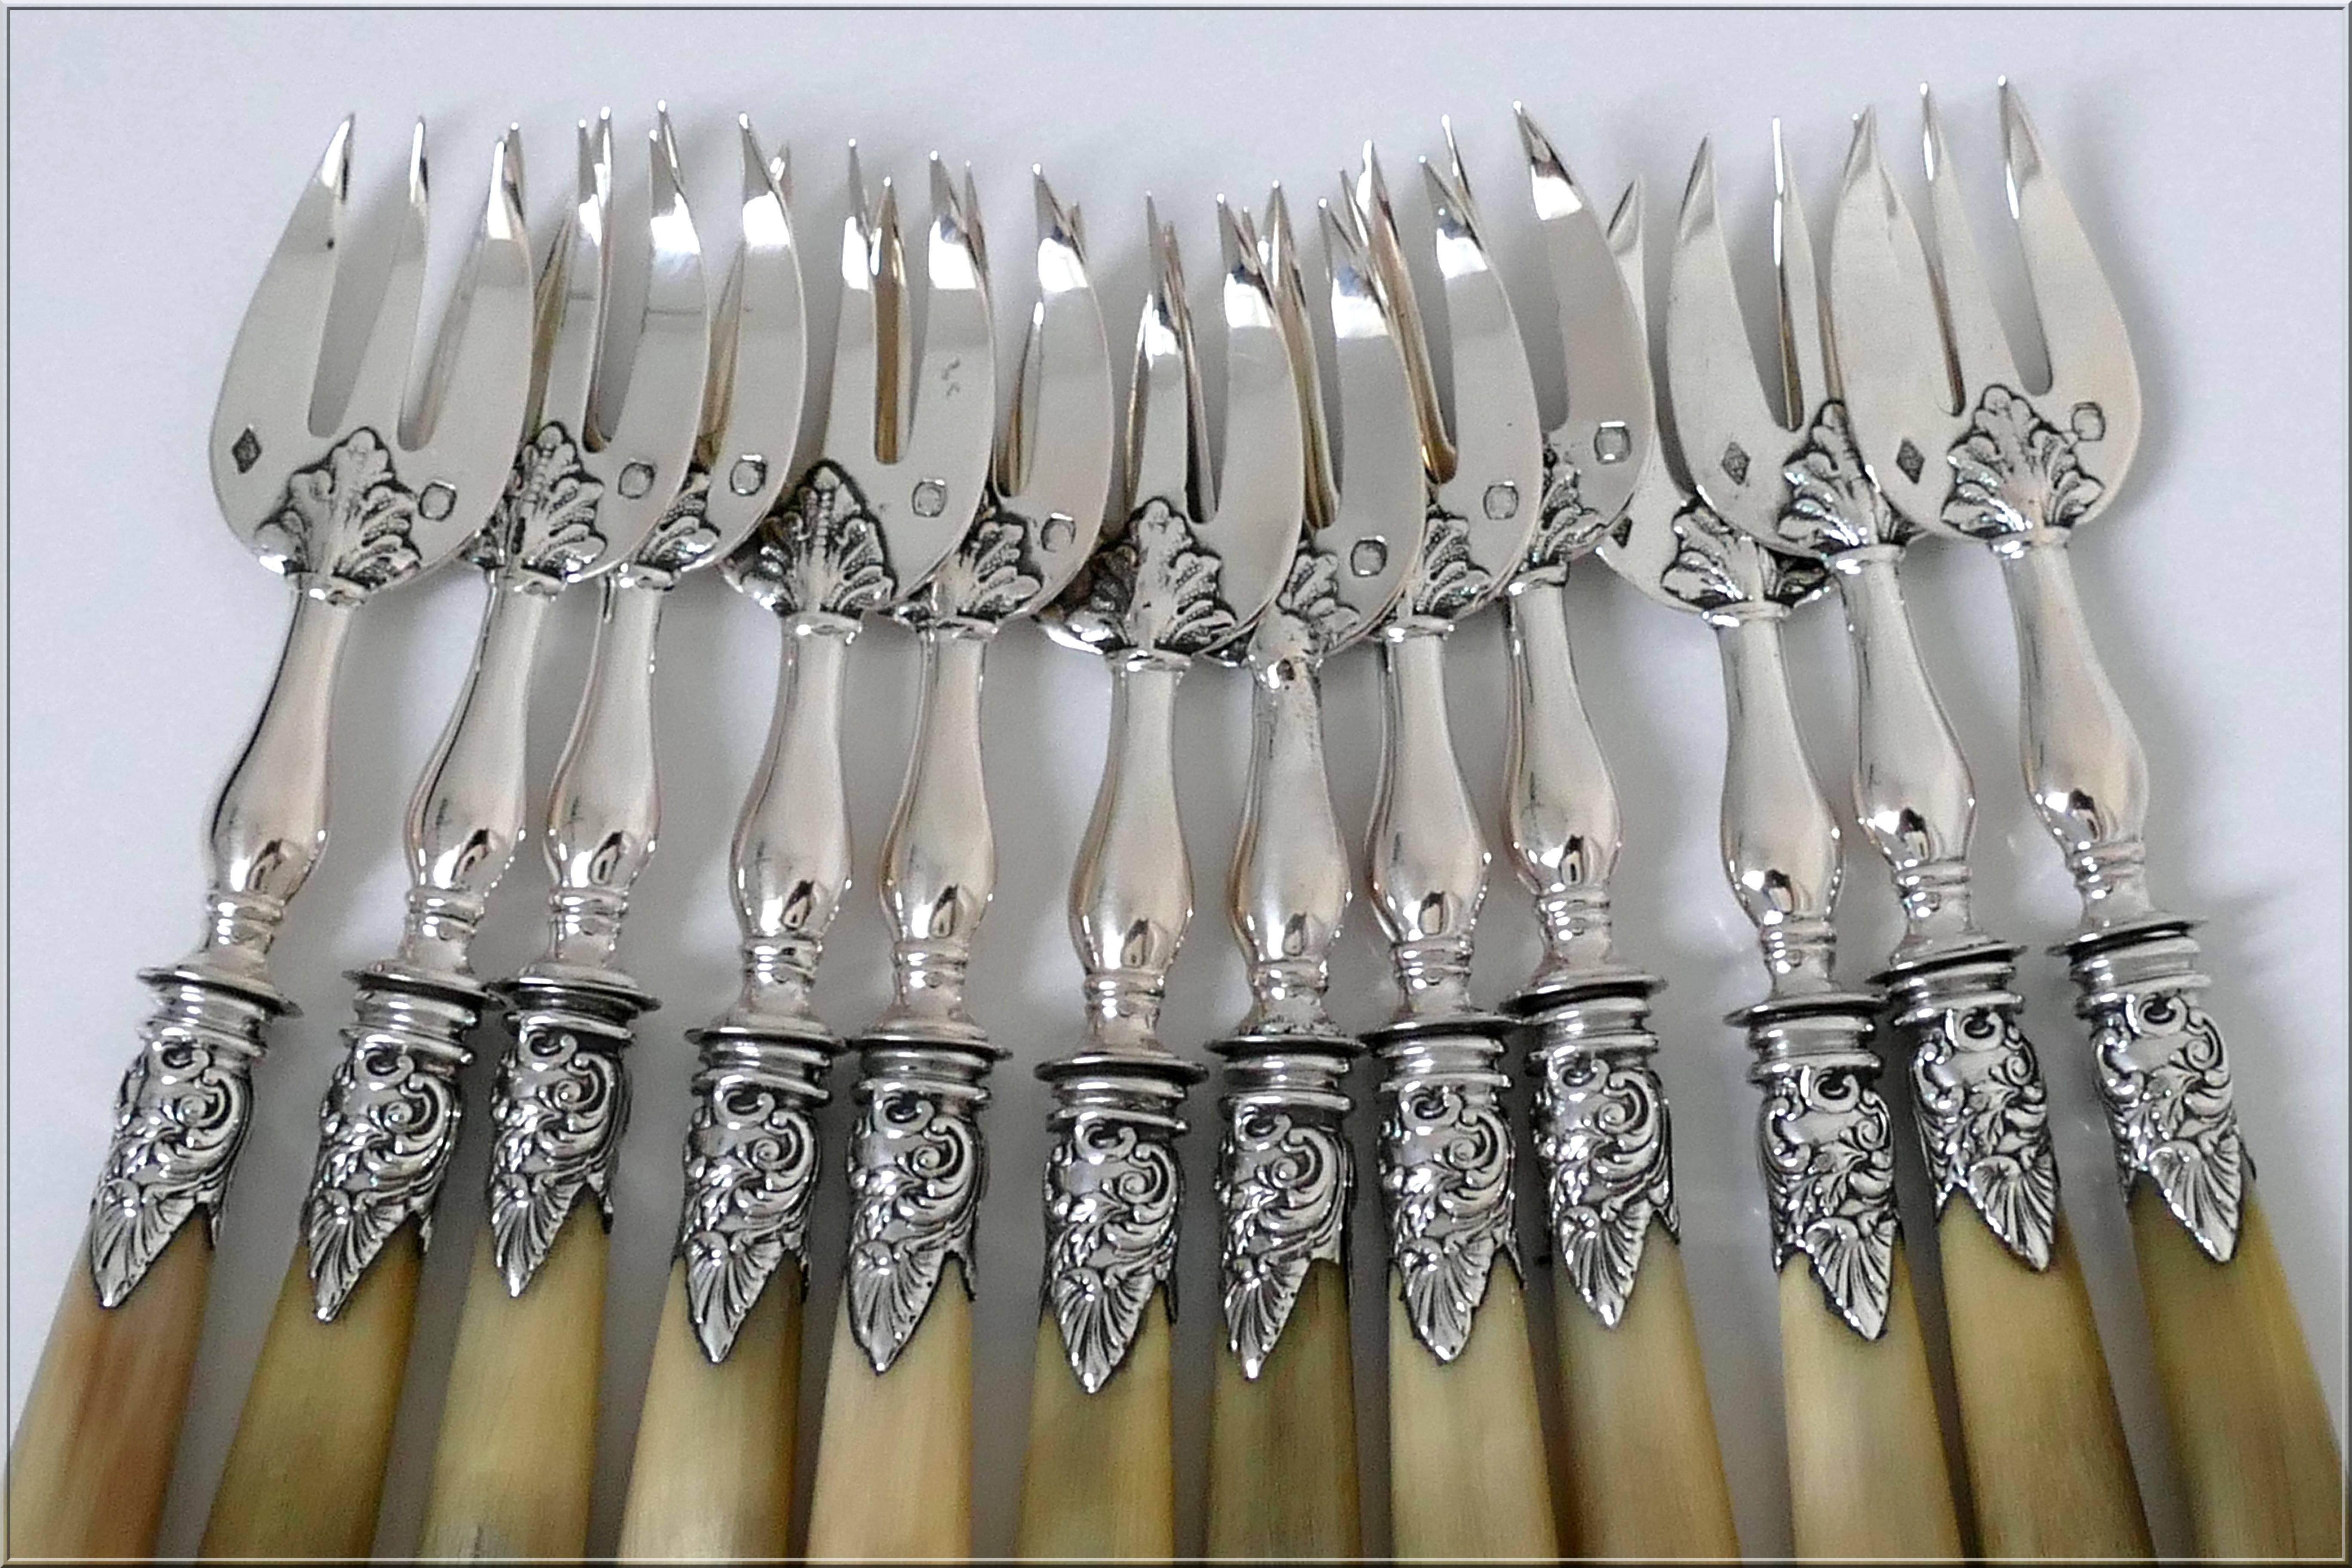 Rococo Soufflot French Sterling Silver Horn Oyster Forks Set of 12 Pieces, Original Box